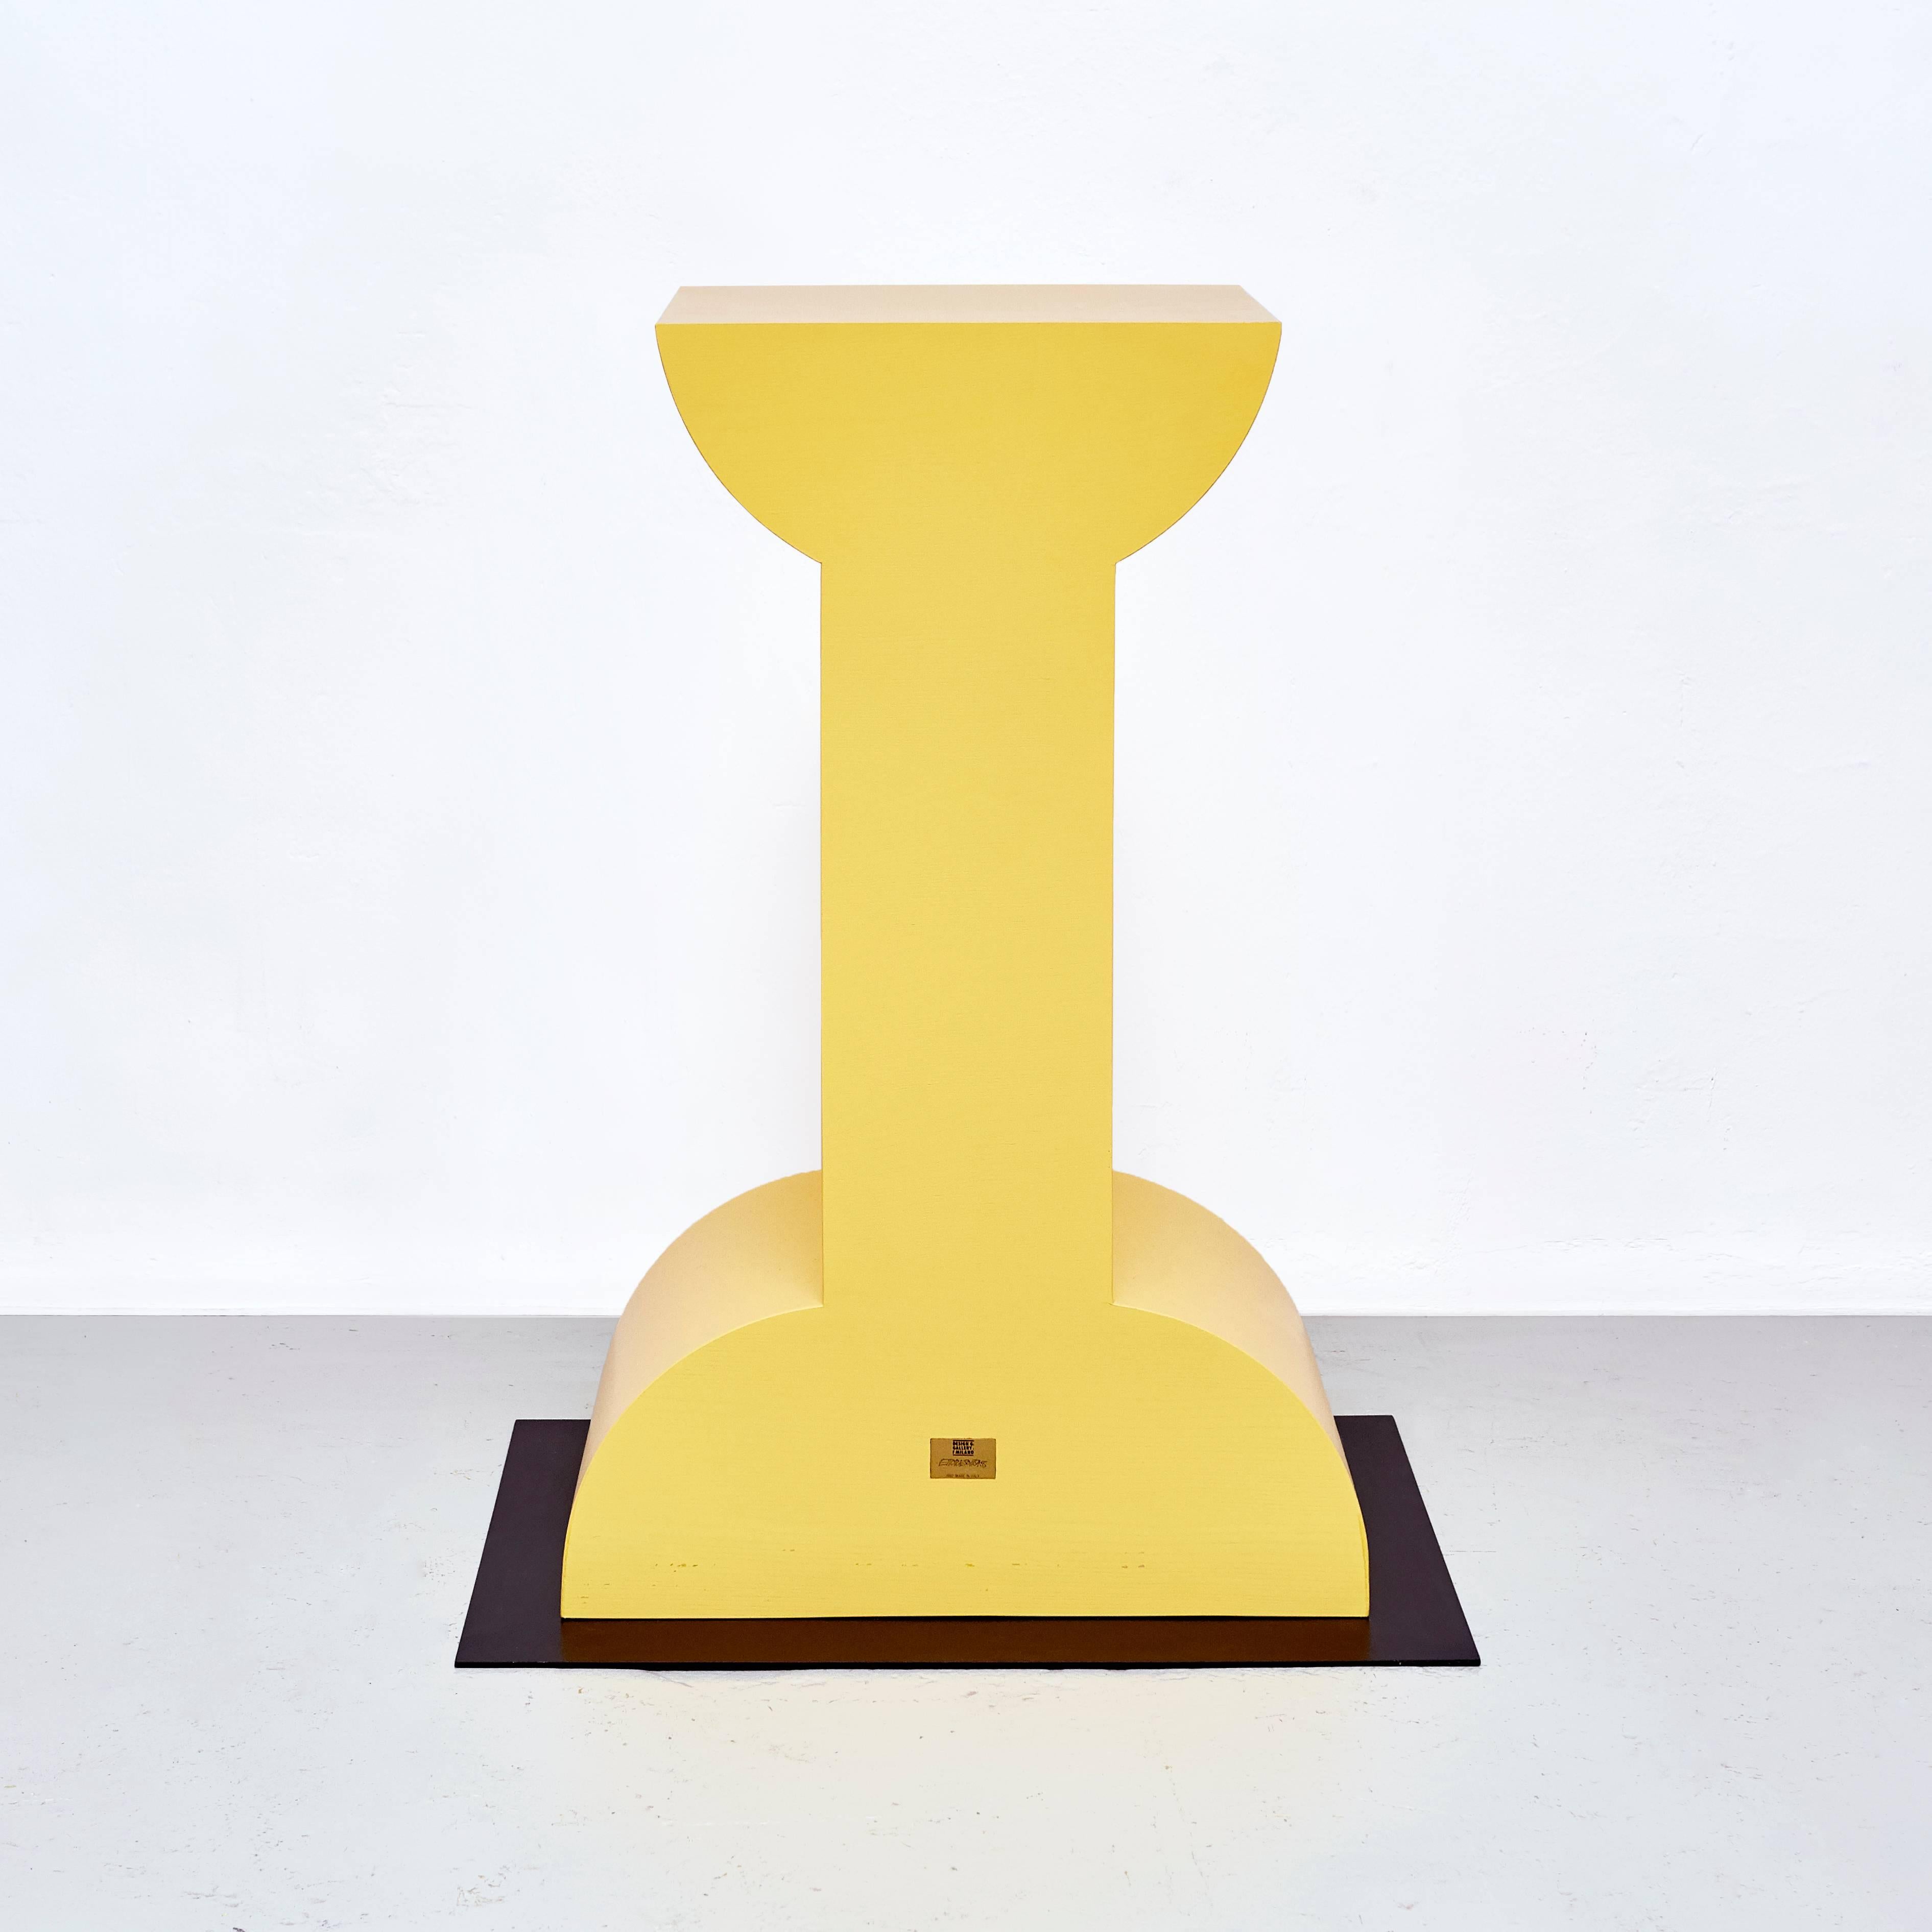 Pedestal Missionario designed by Ettore Sottsass in 1992 edited by Design Gallery Milano.

With metal plaque “design/gallery/milano/Ettore Sottsass/1992 made in Italy.” From the Ruins collection.

Wood, metal.

In original condition, with wear